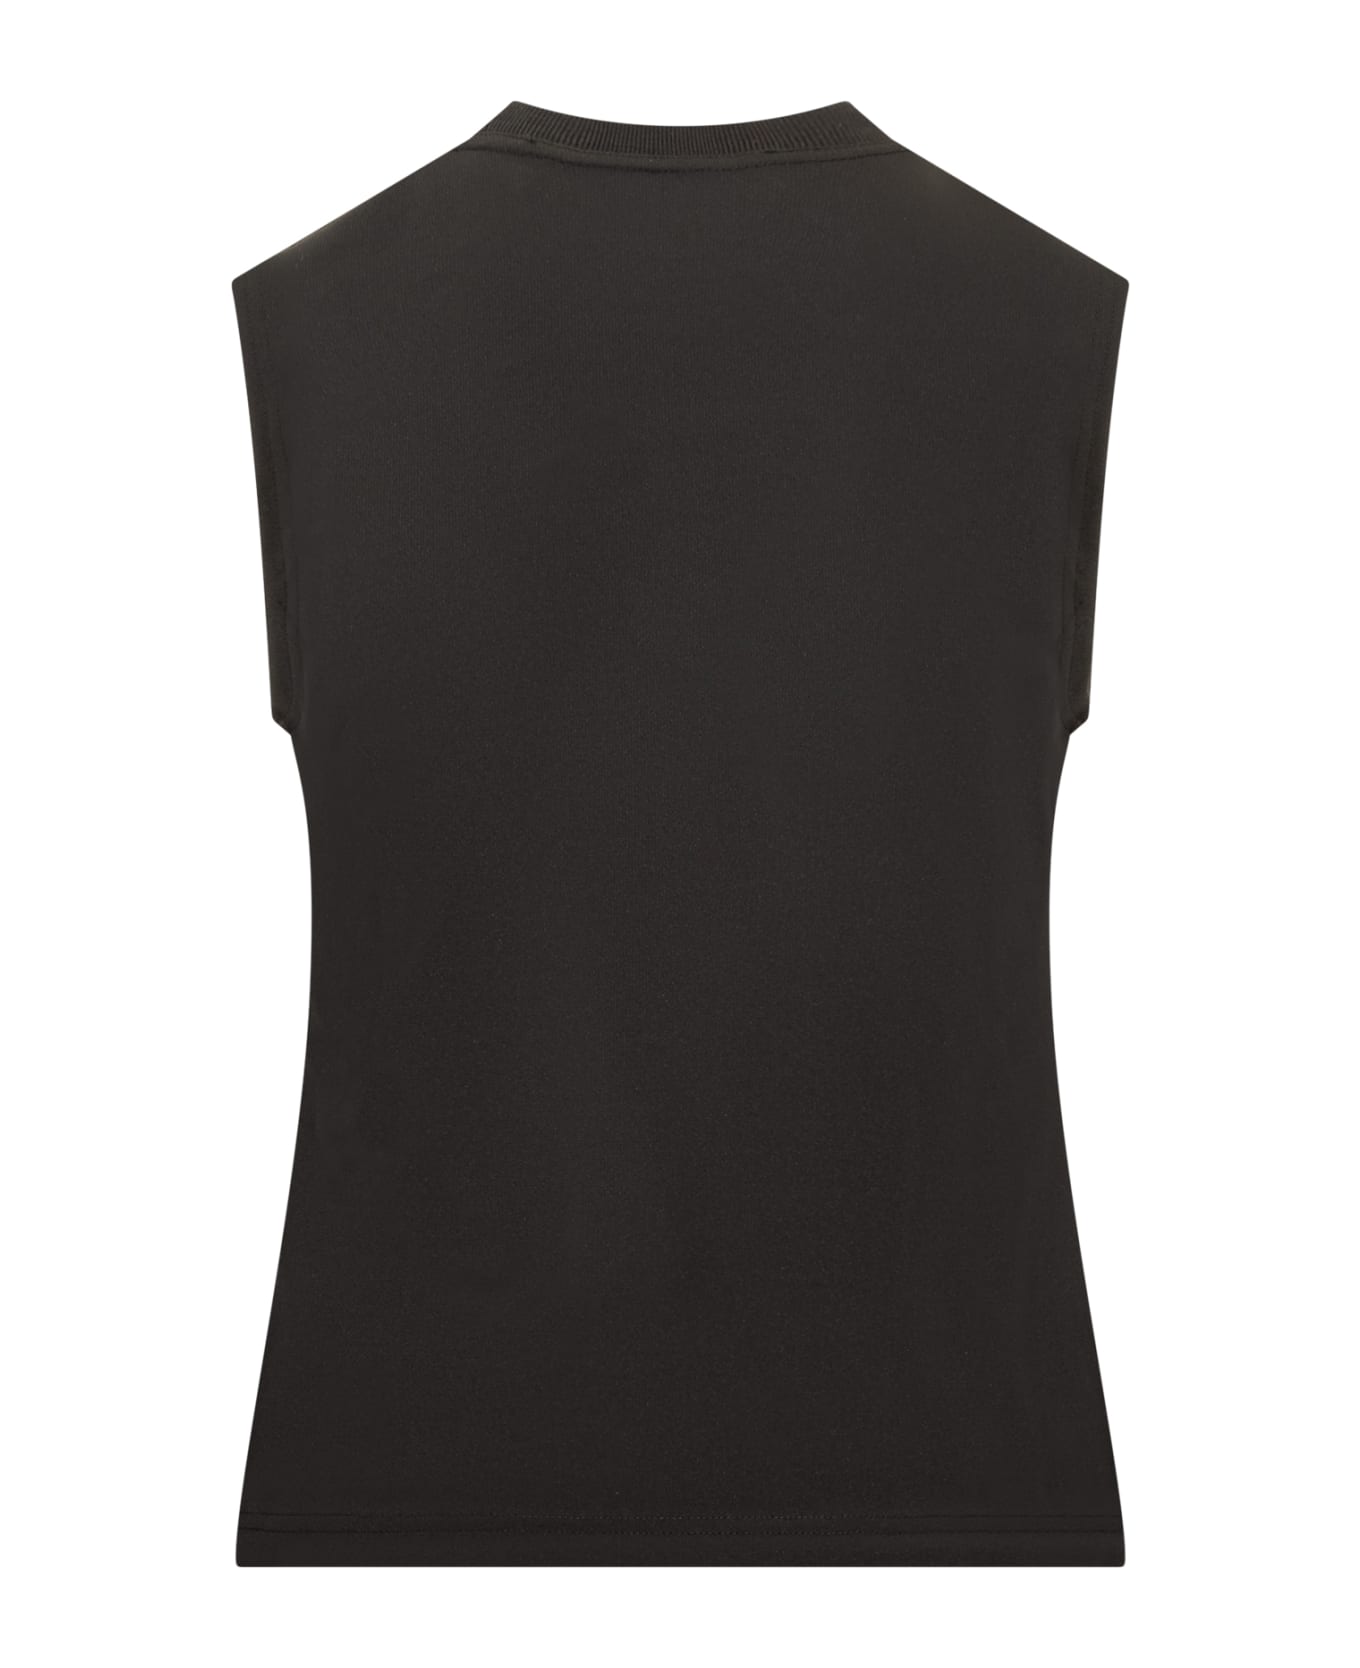 J.W. Anderson Embroidery Tank Top - Black タンクトップ